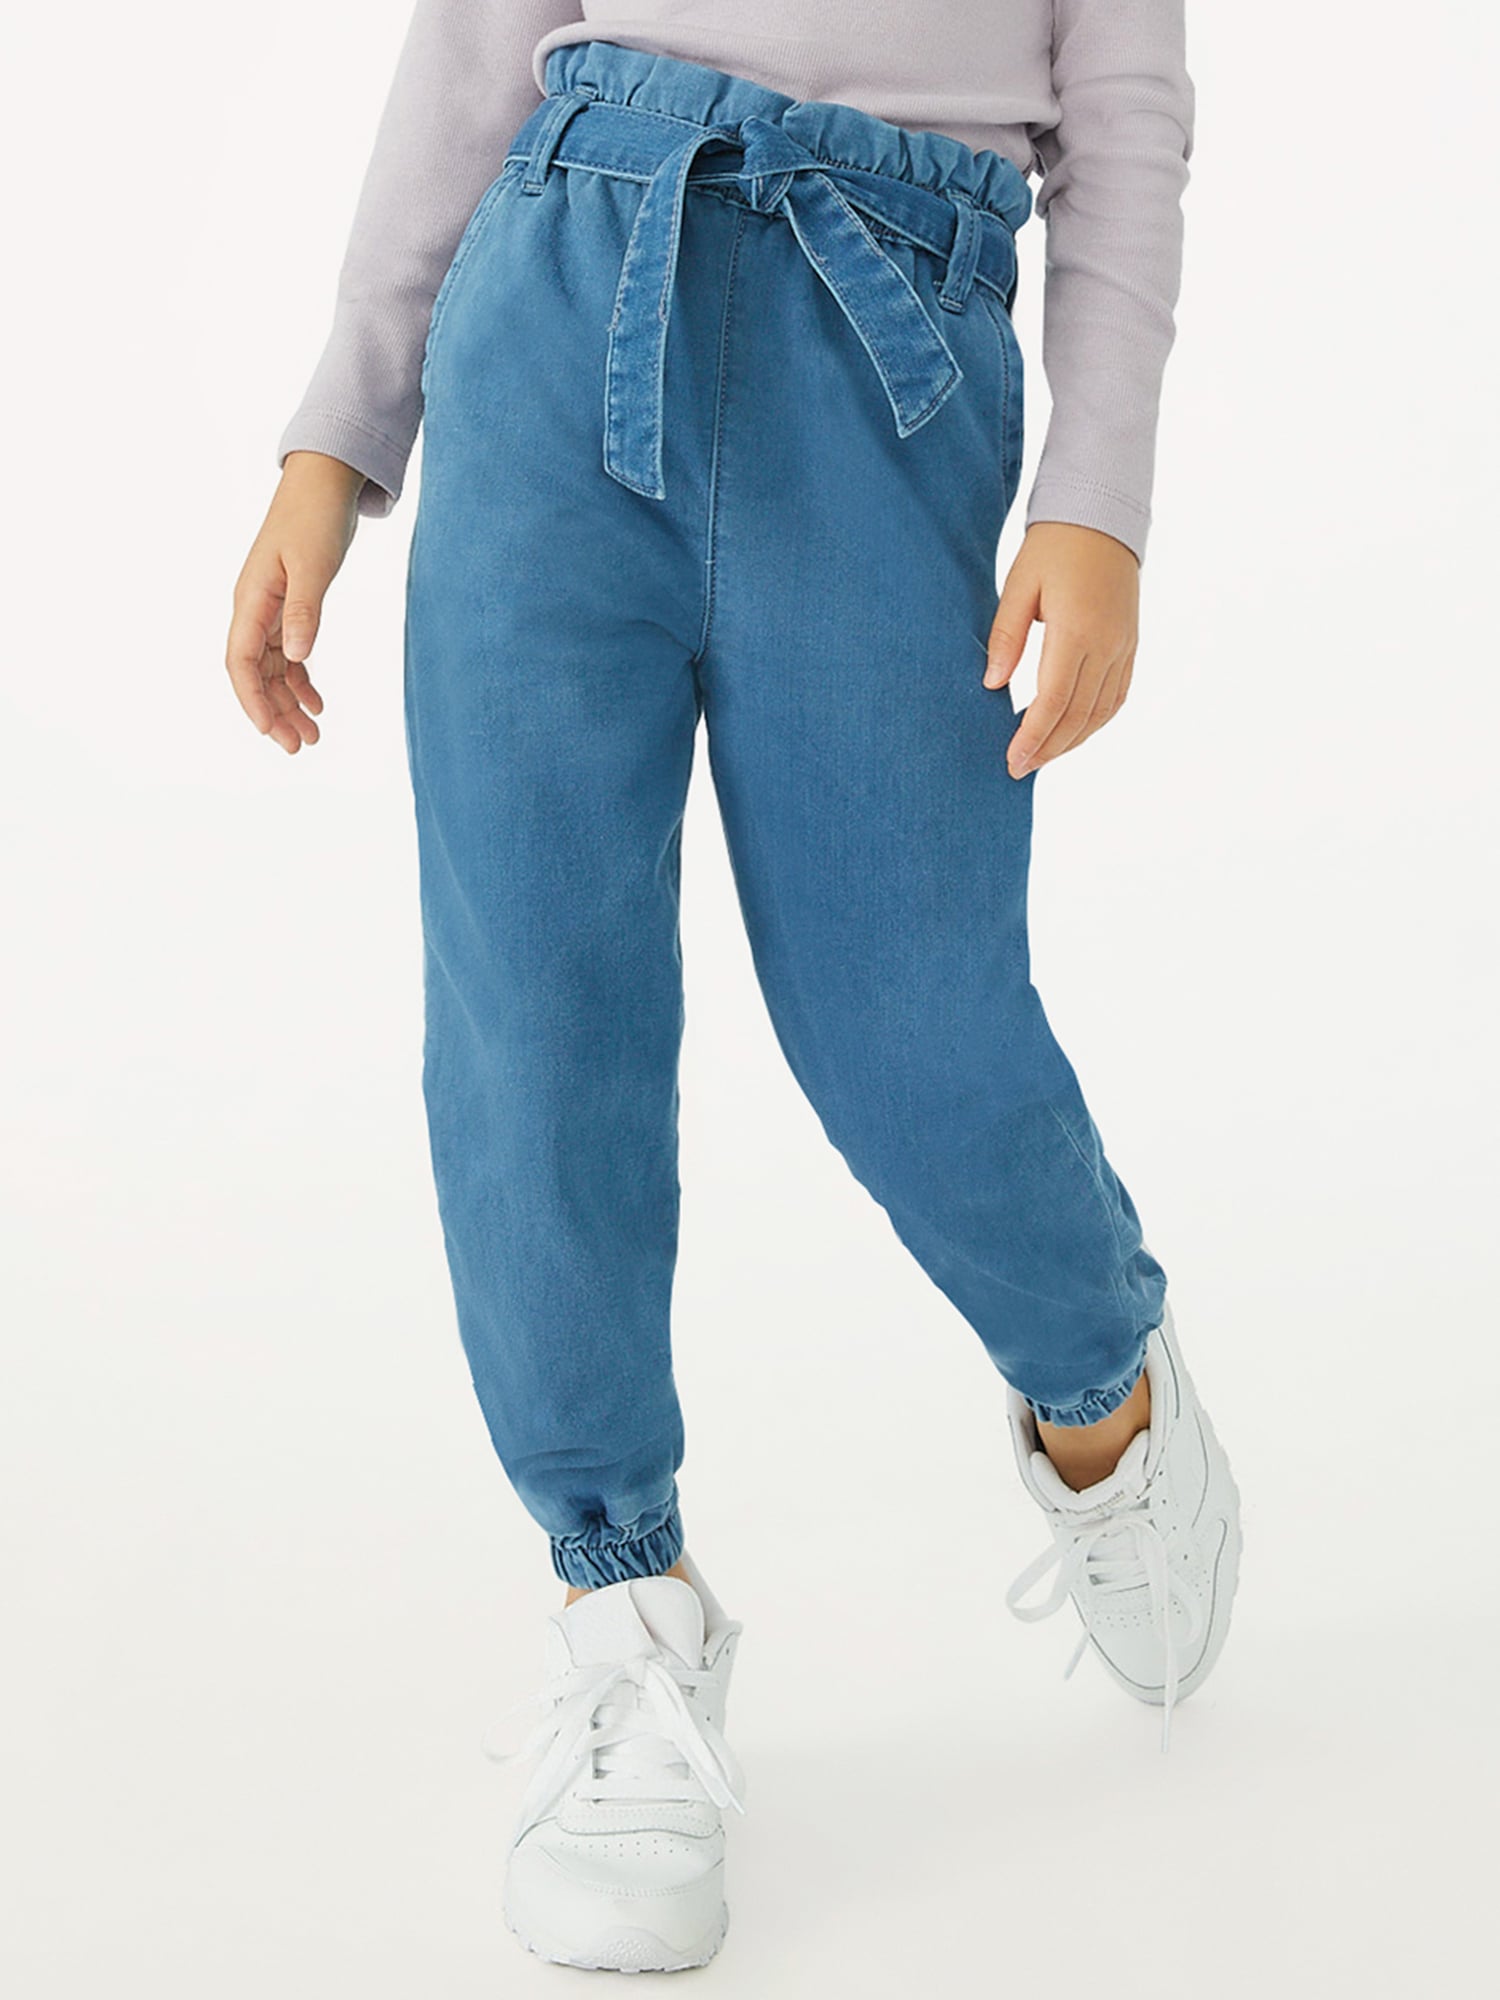 Free Assembly Girls Denim Joggers with Tie Waist, Sizes 5-18, 15 Pieces  From Walmart's Free Assembly Kids Line That I Wish Came in Adult Sizes